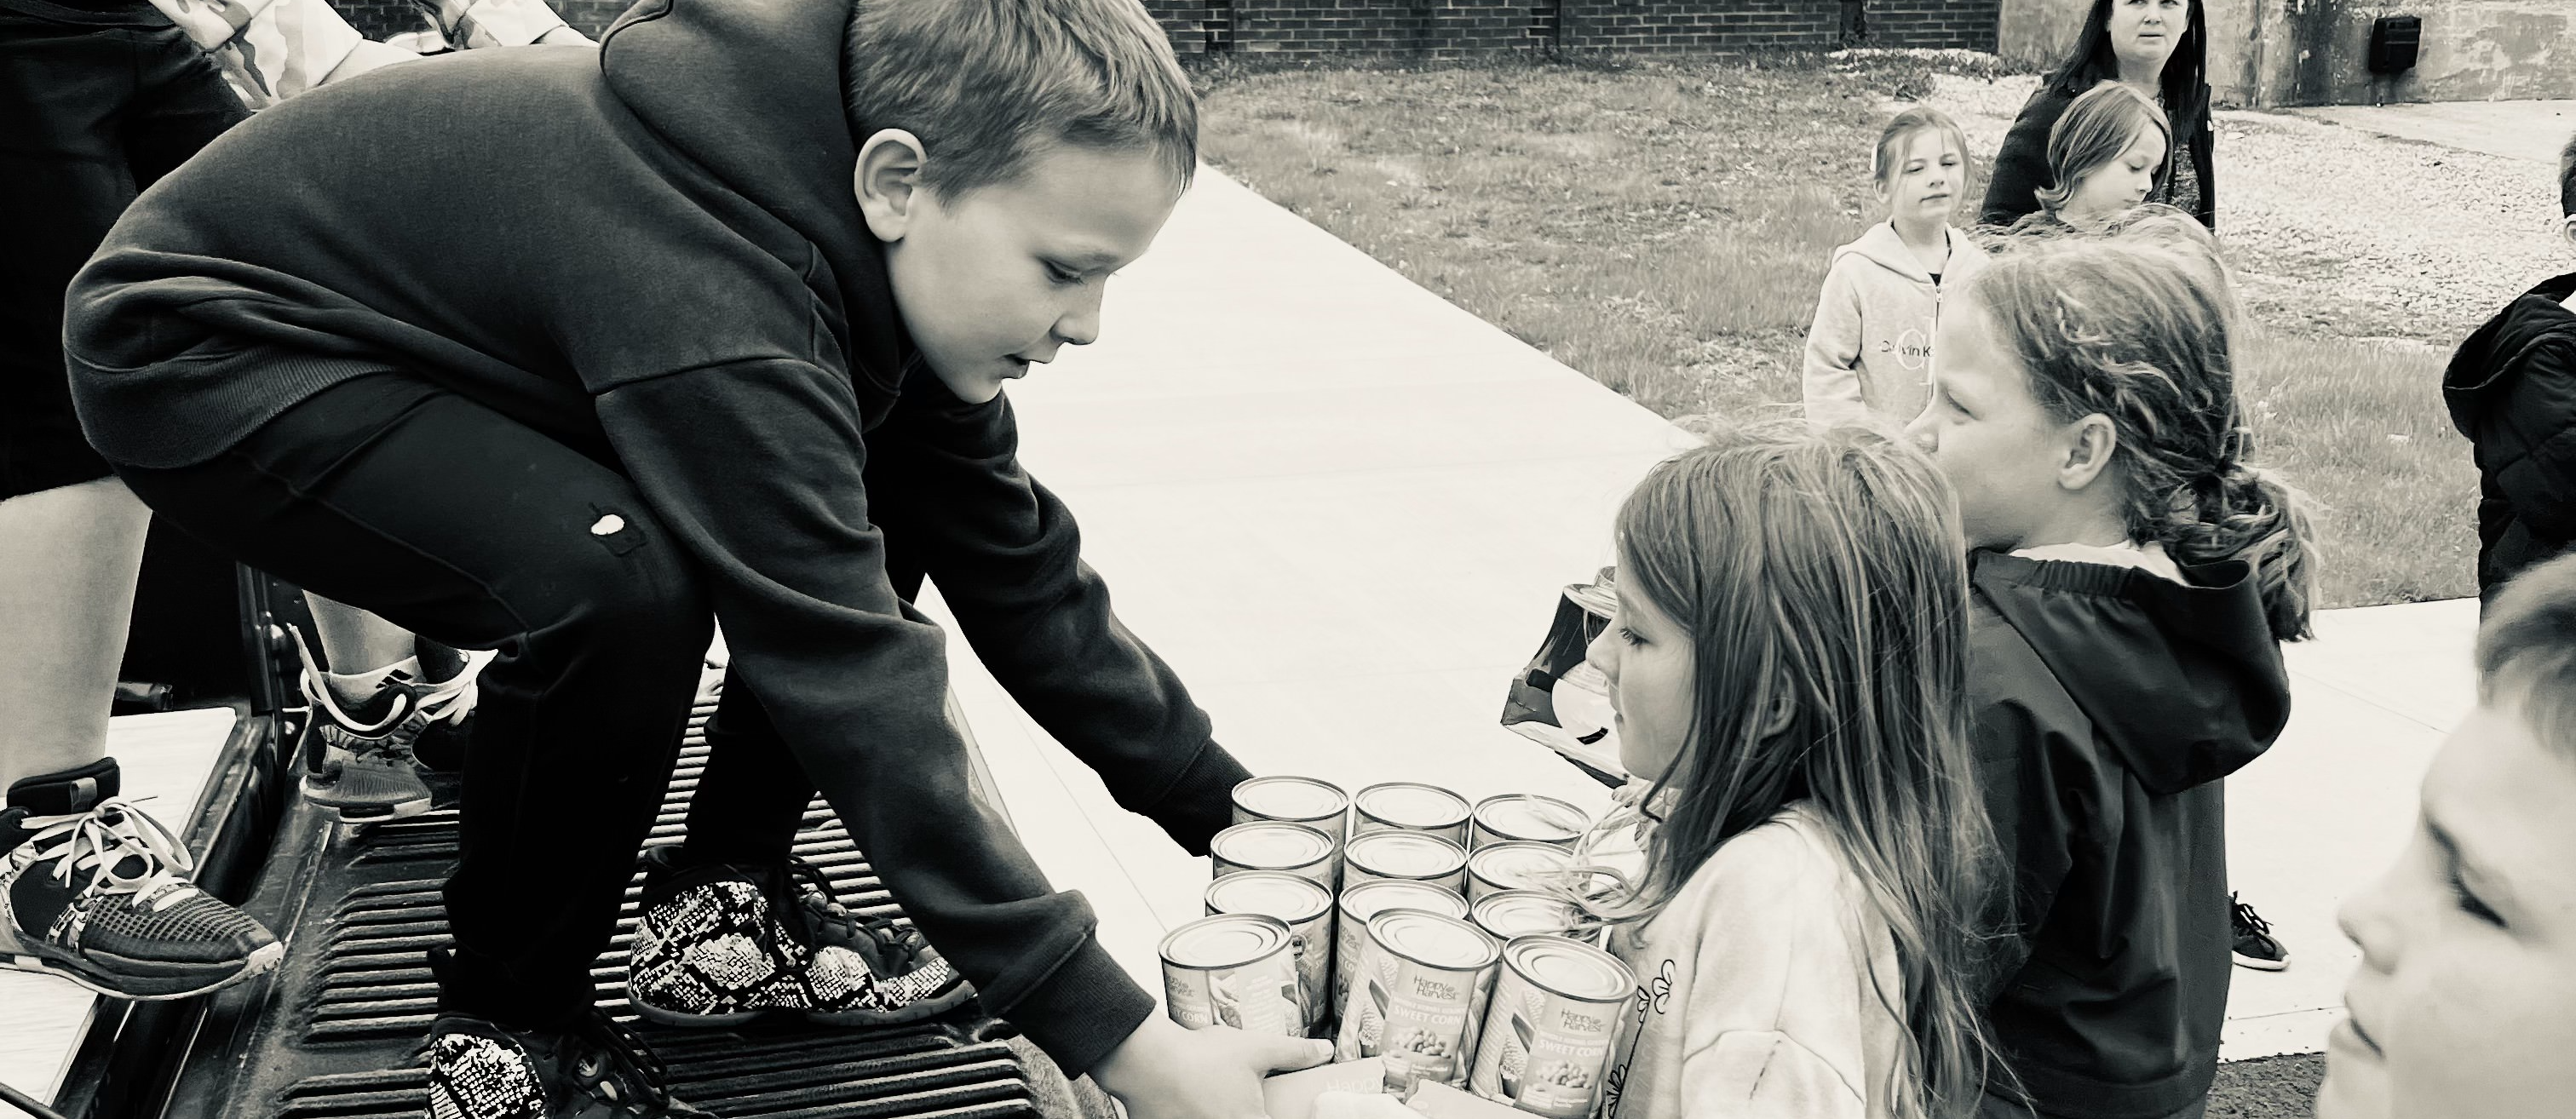 Boy on a truck accepting a box of canned goods from a girl